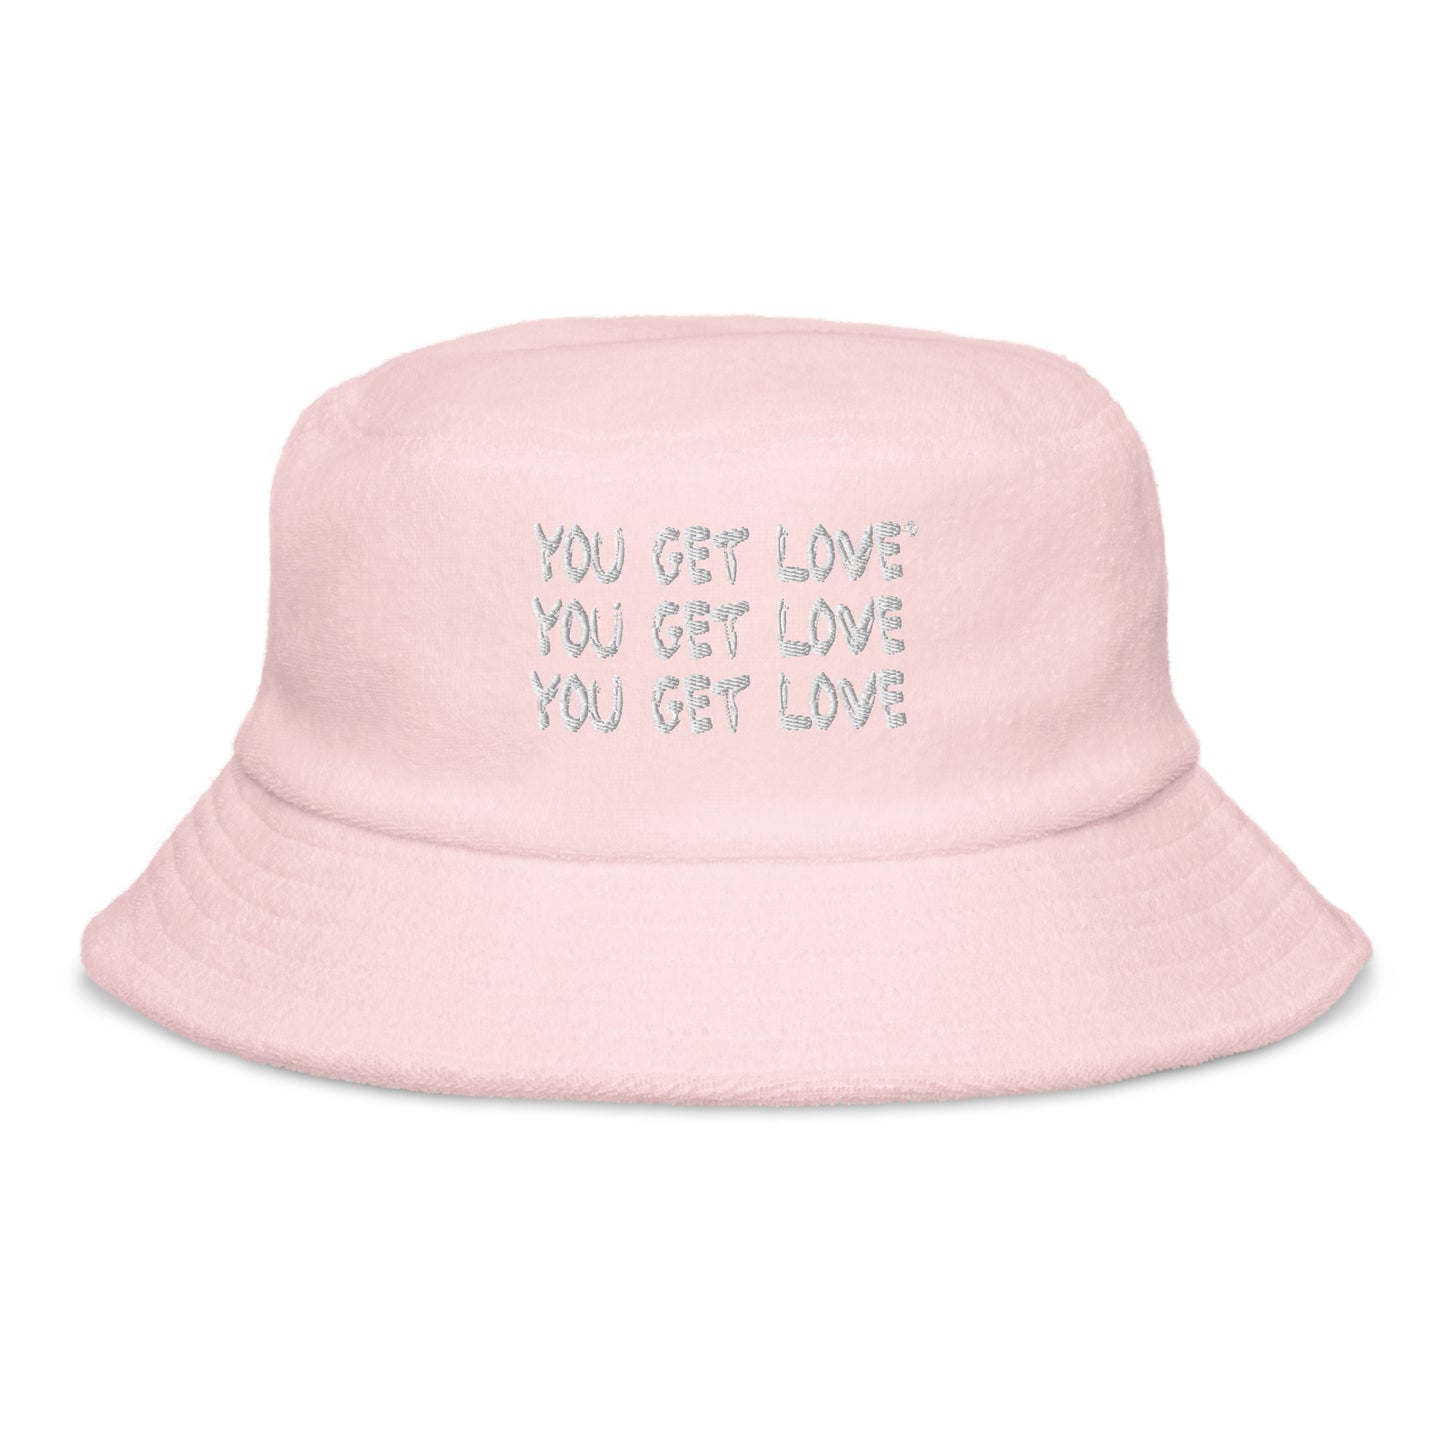 You Get Love Terry cloth bucket hat